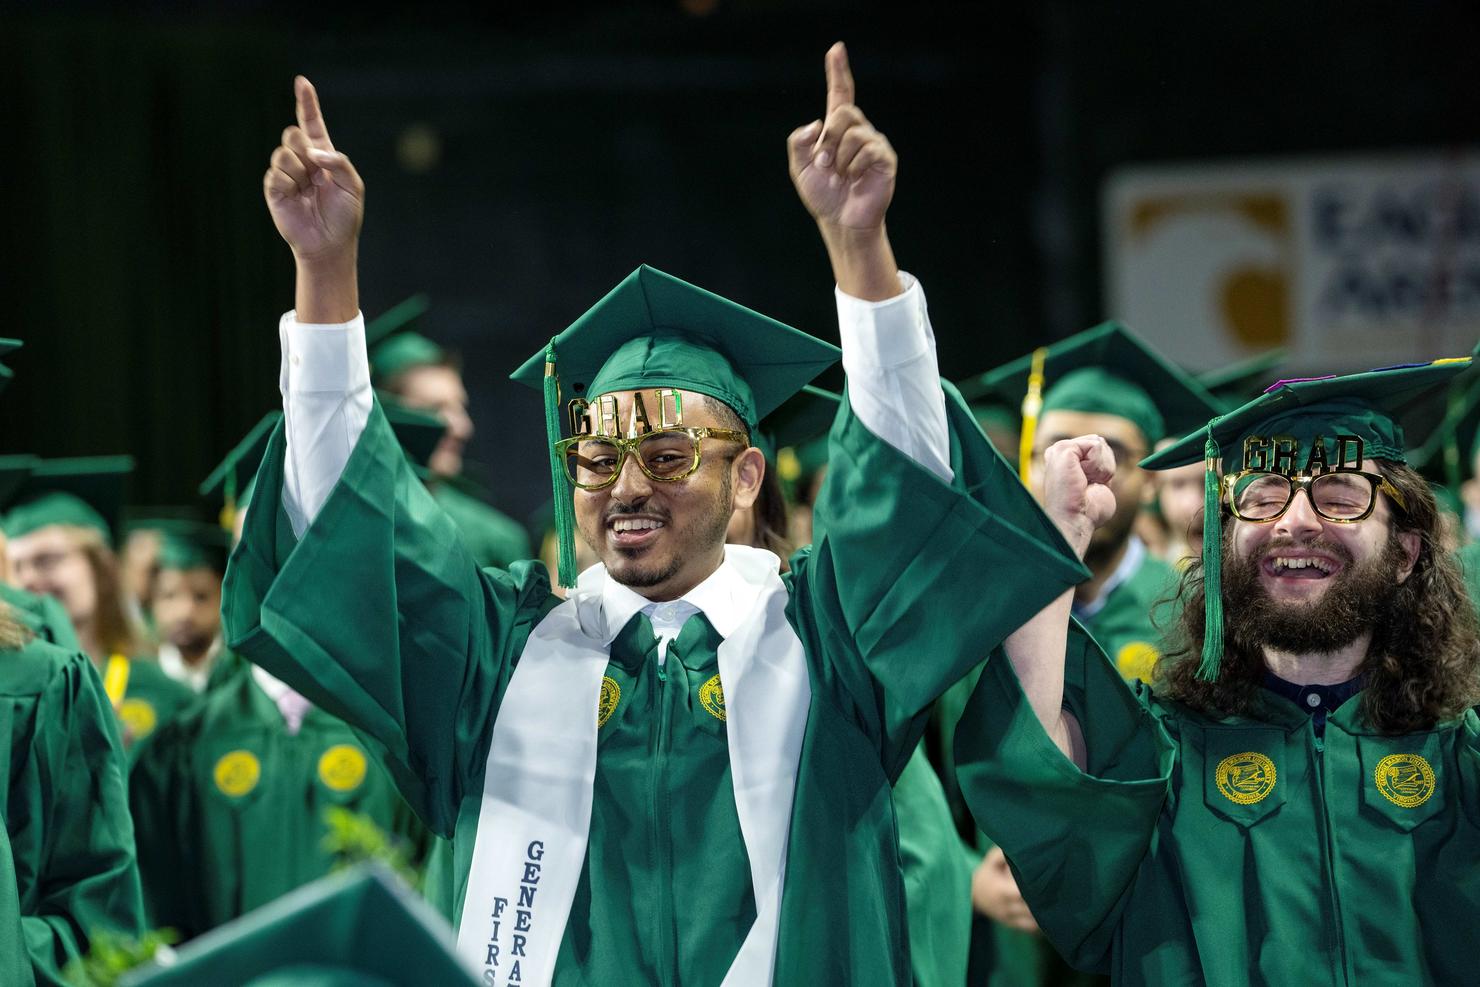 Graduate holds his arms up in victory while wearing glasses that say "Grad"